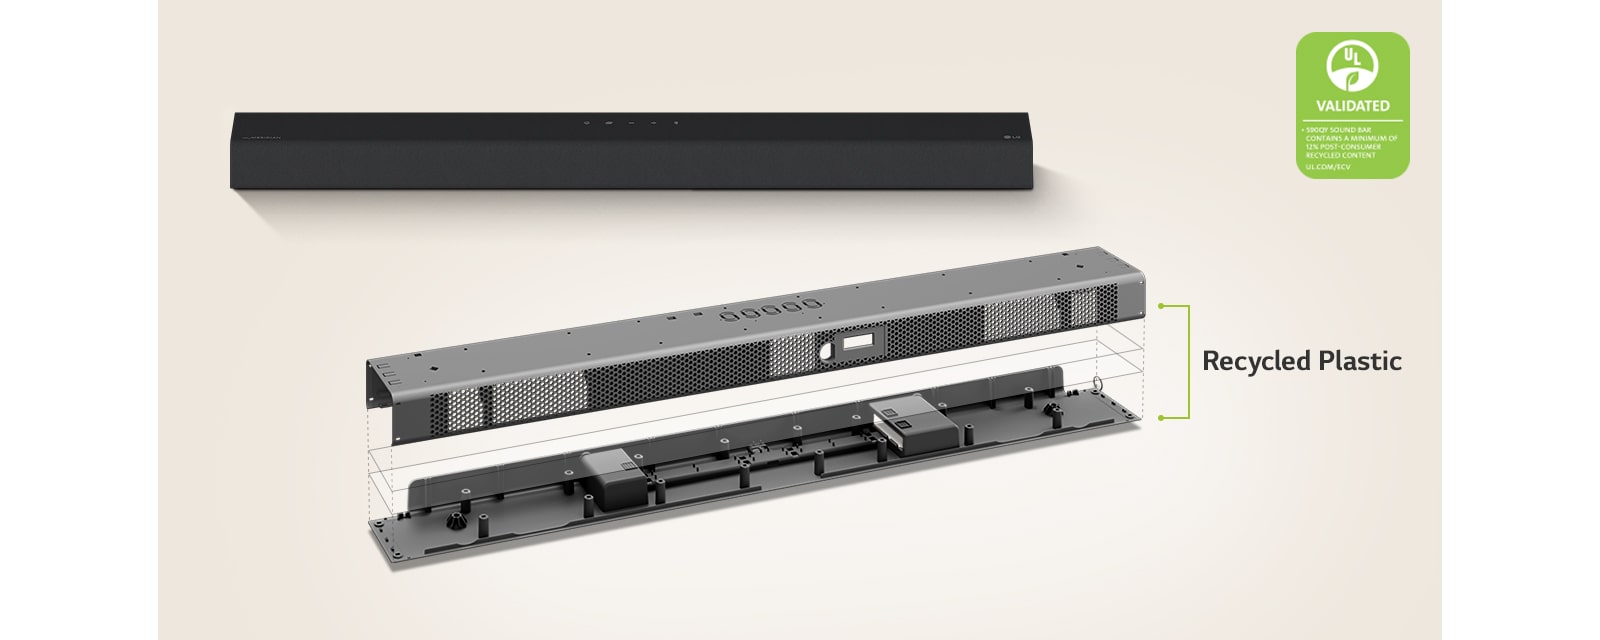 There is a front view of sound bar behind and a metal frame image of sound bar in front.